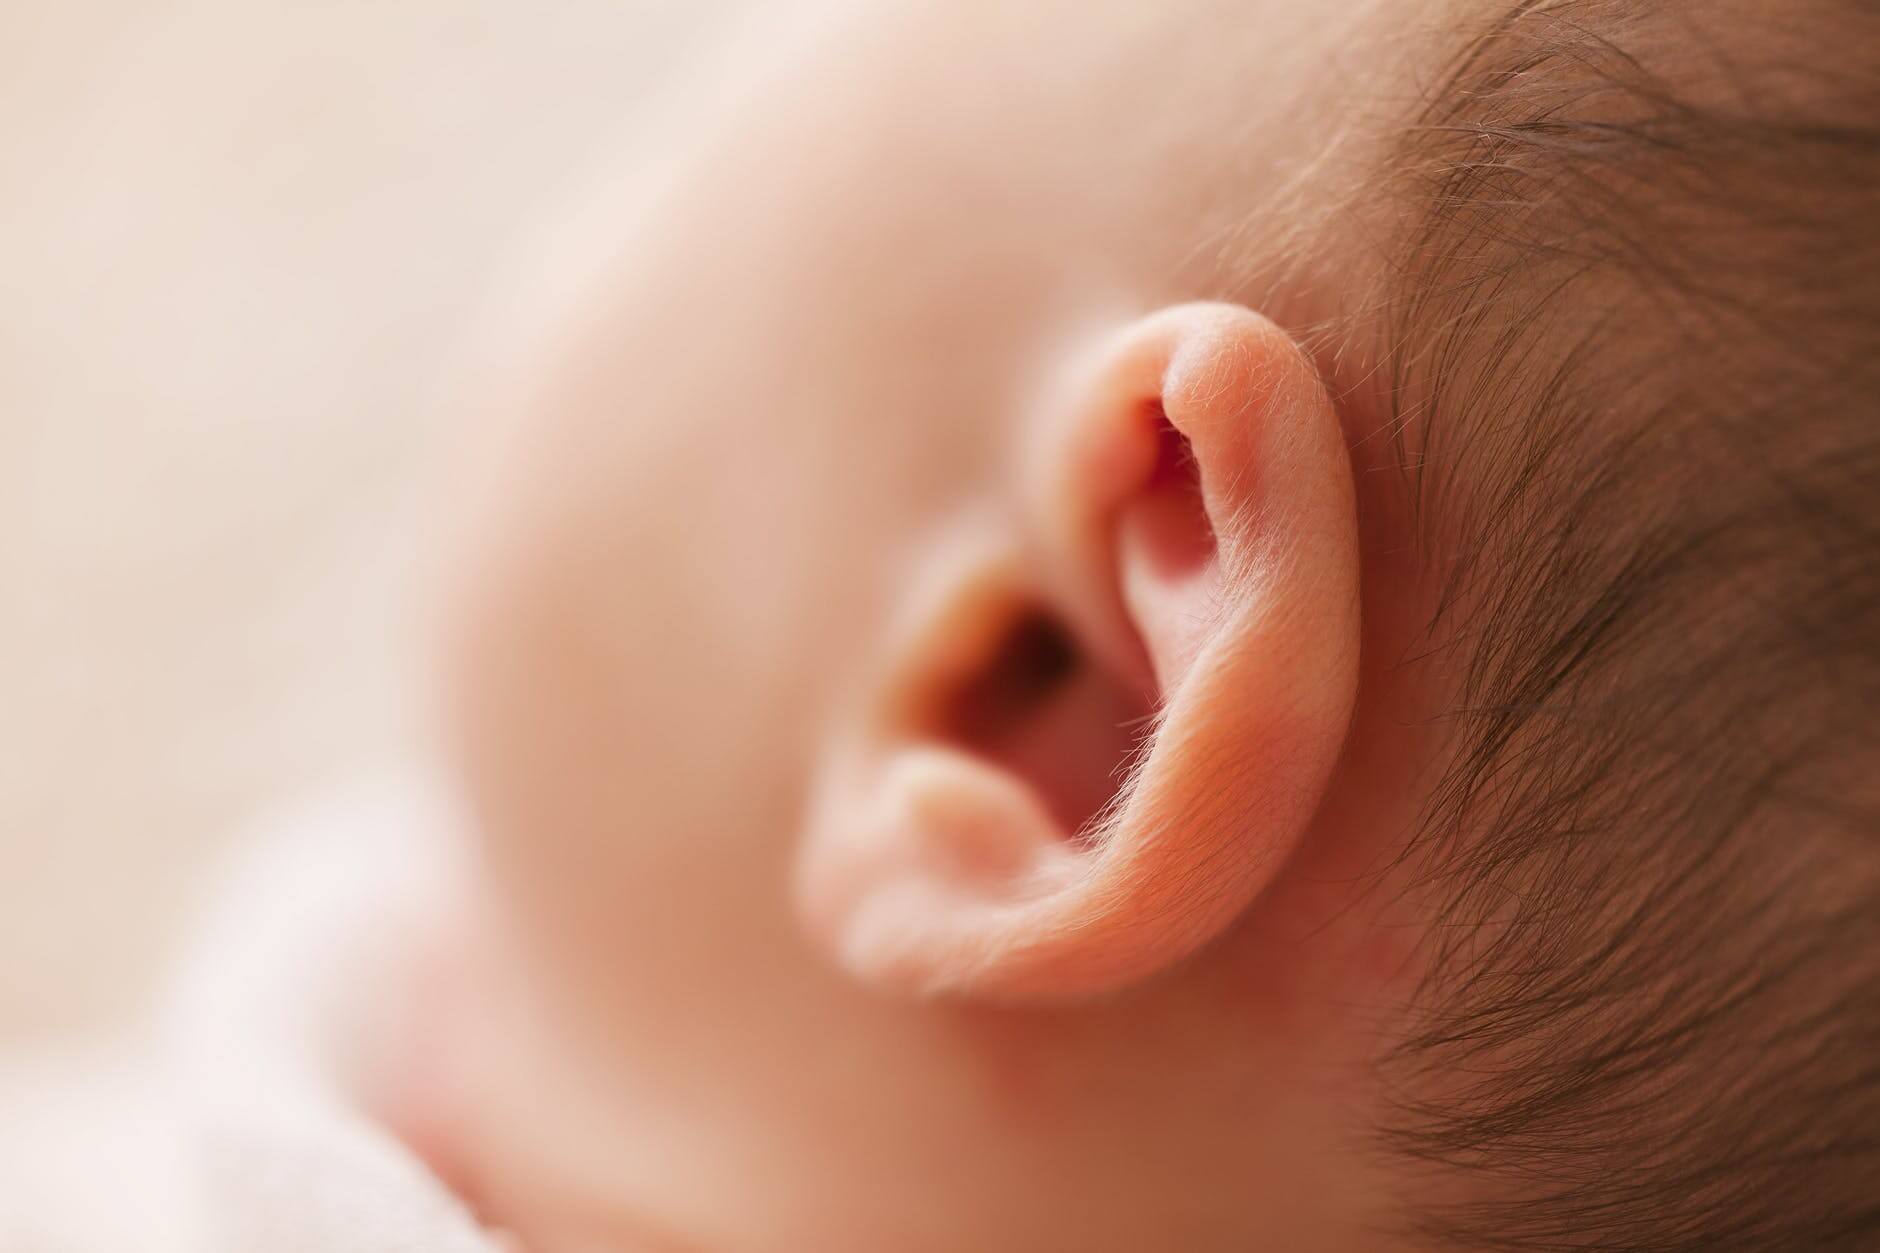 How to Tell If Baby Has an Ear Infection? Signs and Symptoms